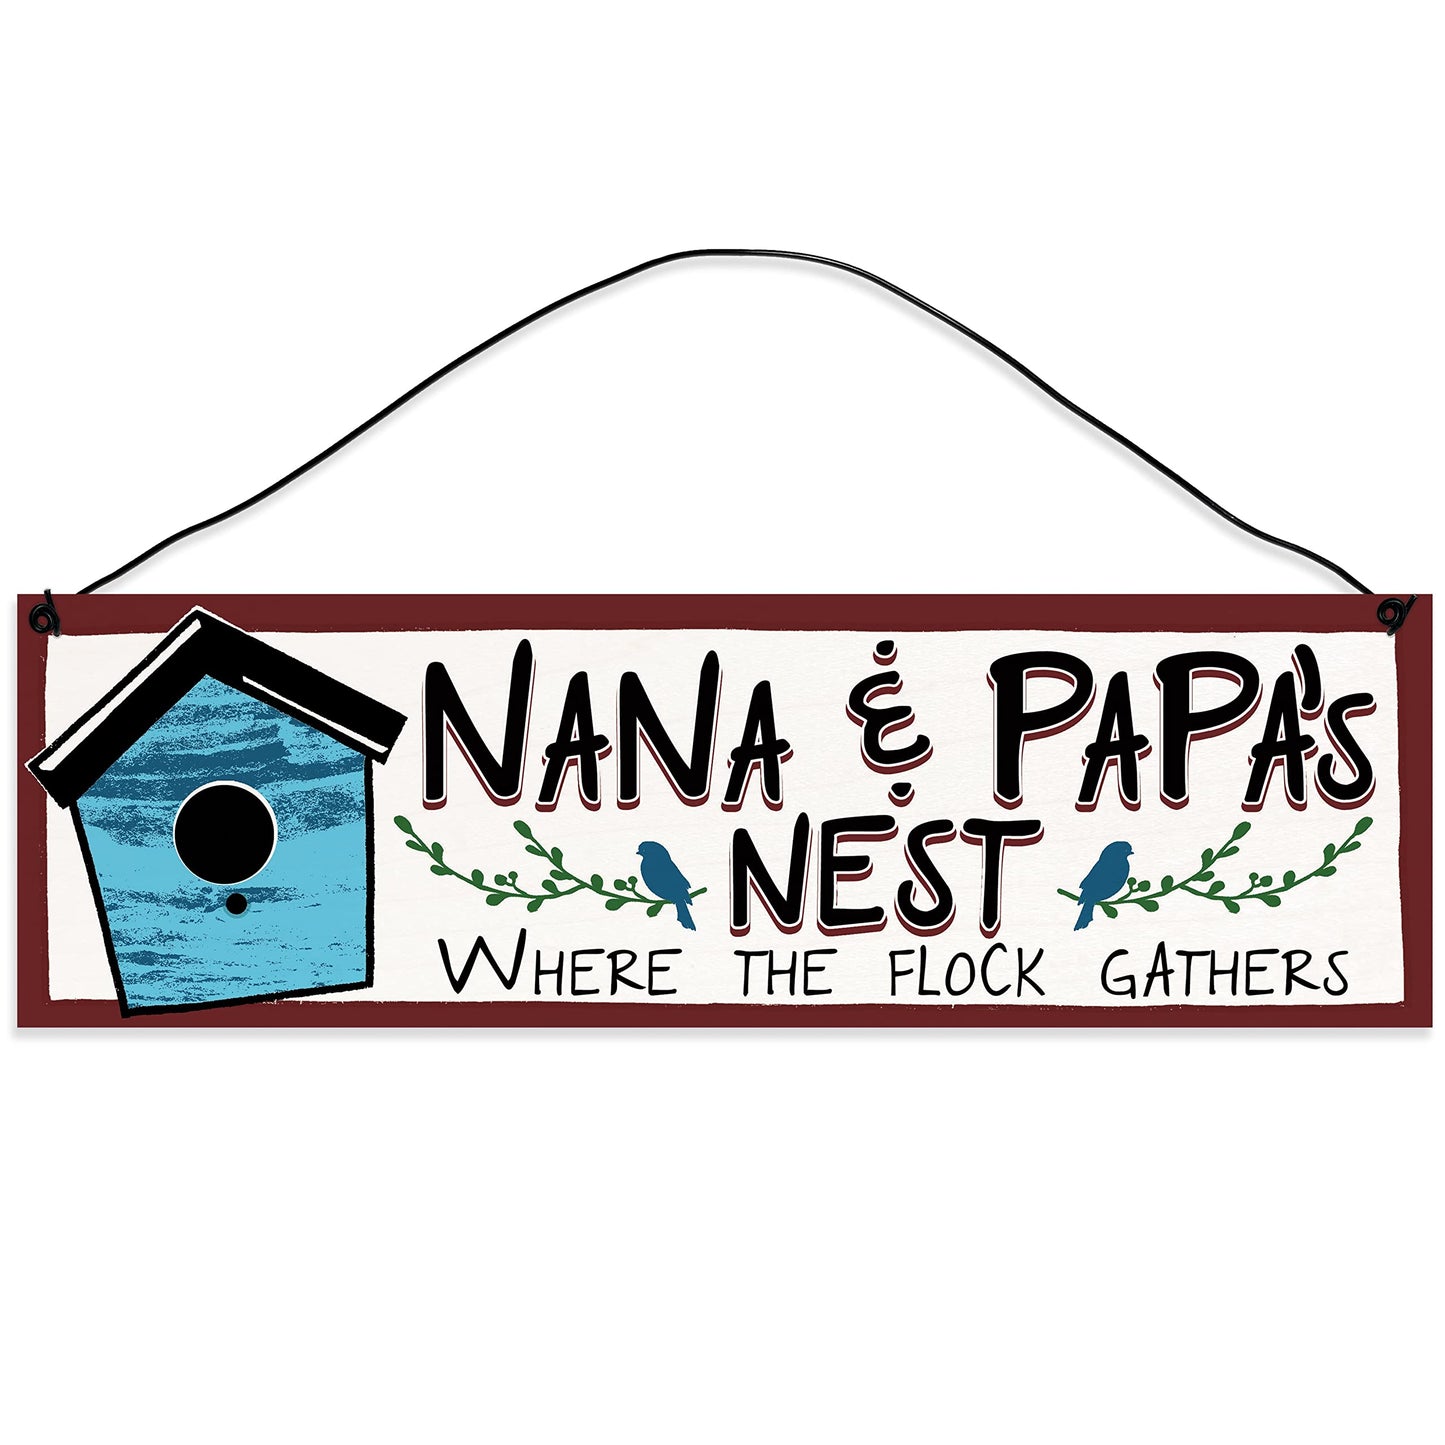 Nana and Papas Nest. Flock Gathers | Grandparents Gift | Handmade | Wood Sign | Wire Hanger/Stand | UV Printed | Solid Maple